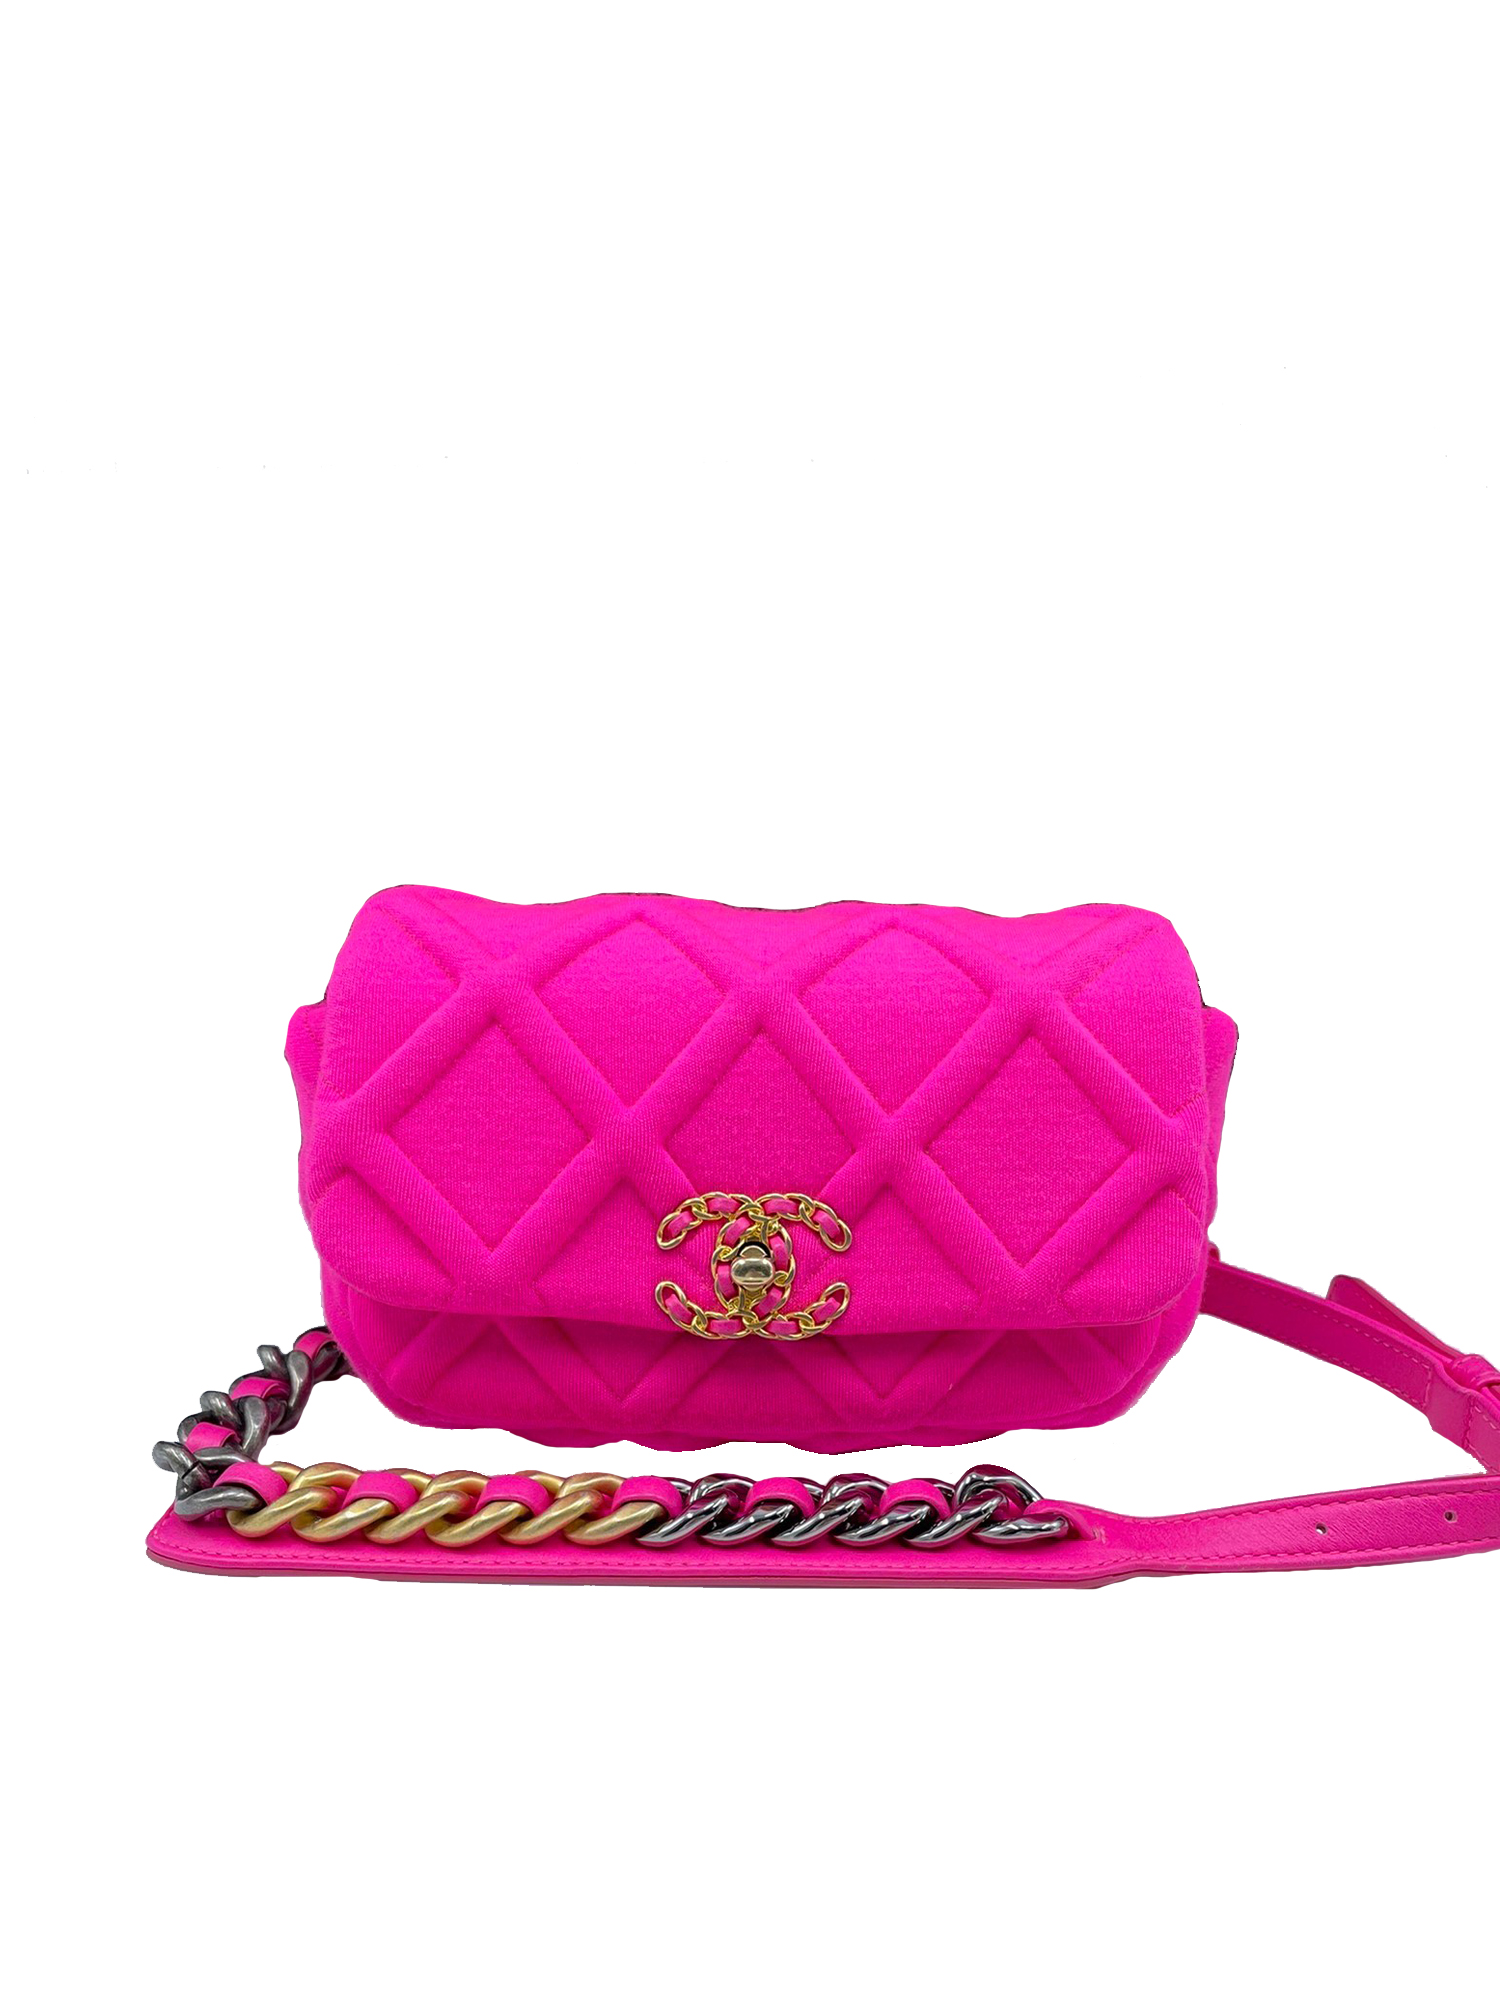 Chanel 19 Belt Bag Jersey in Pink Holo29